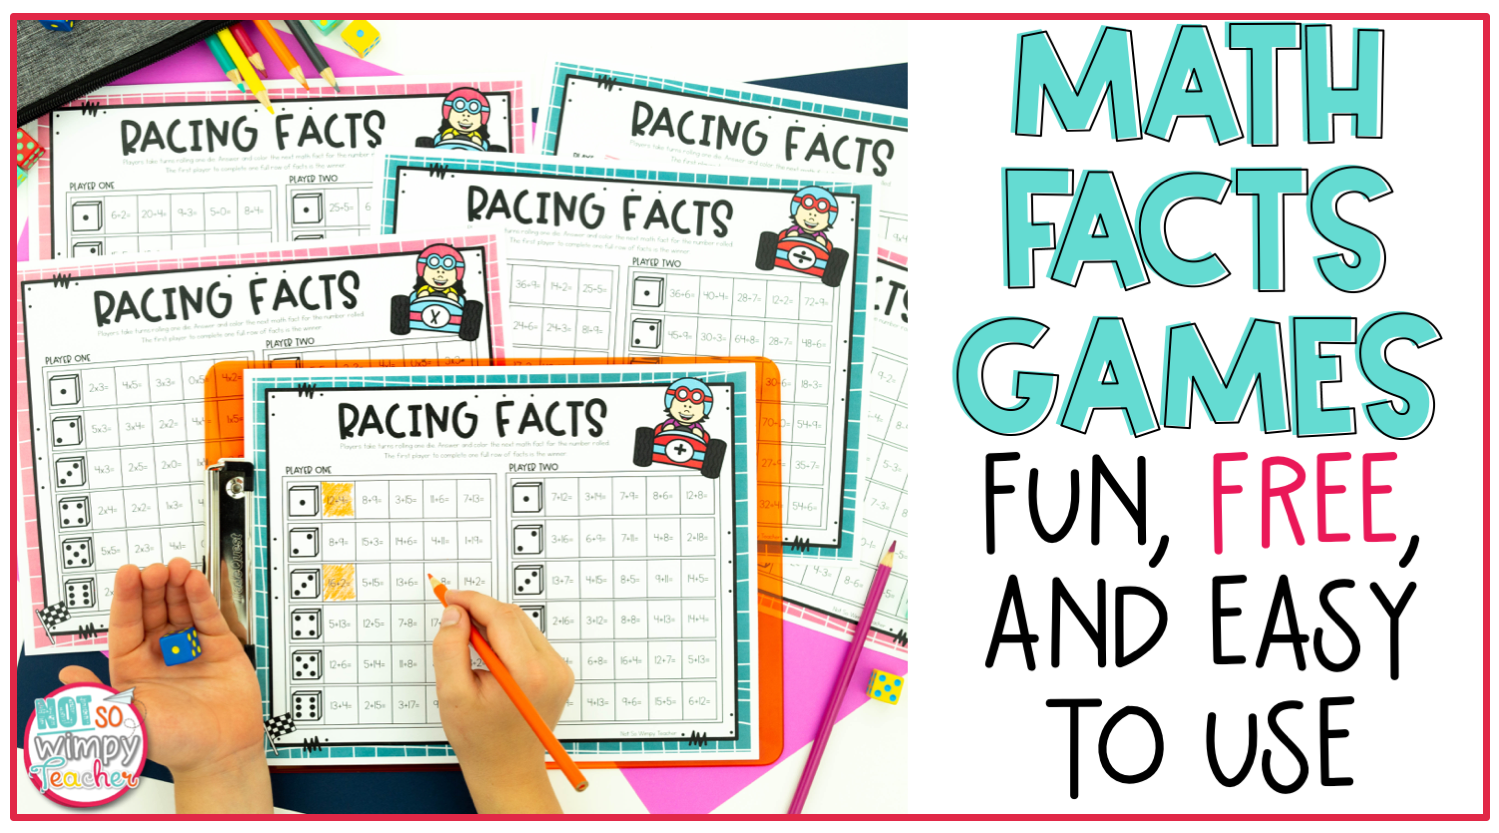 Math Facts Practice: 43 Fun Games and Activities for Kids